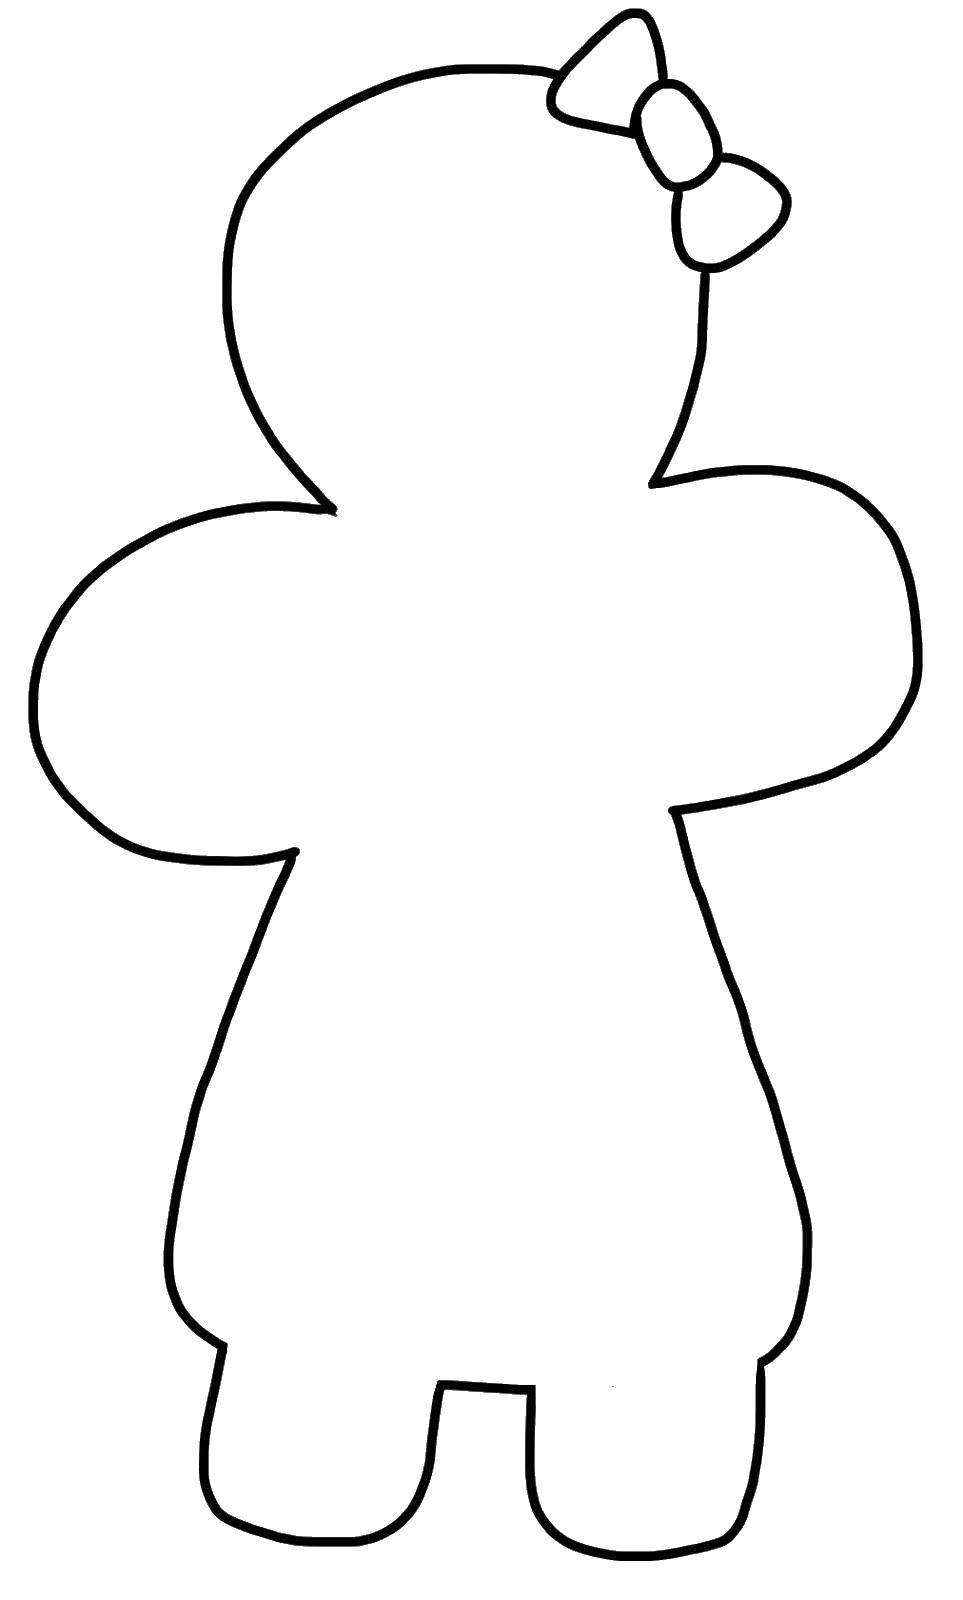 Coloring Contour with a bow. Category The contour of the doll . Tags:  Outline .